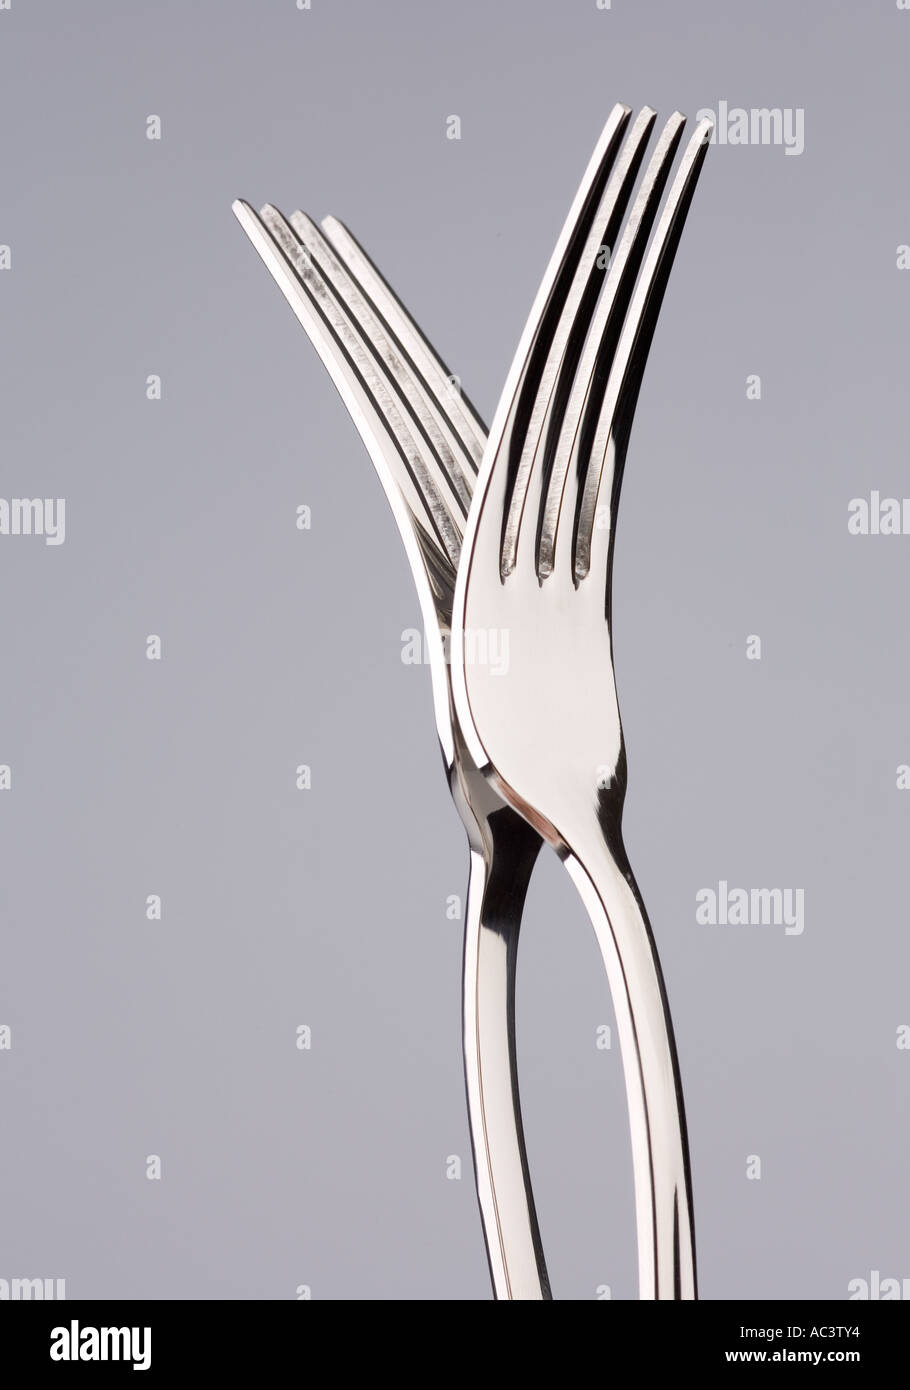 two forks joined Stock Photo